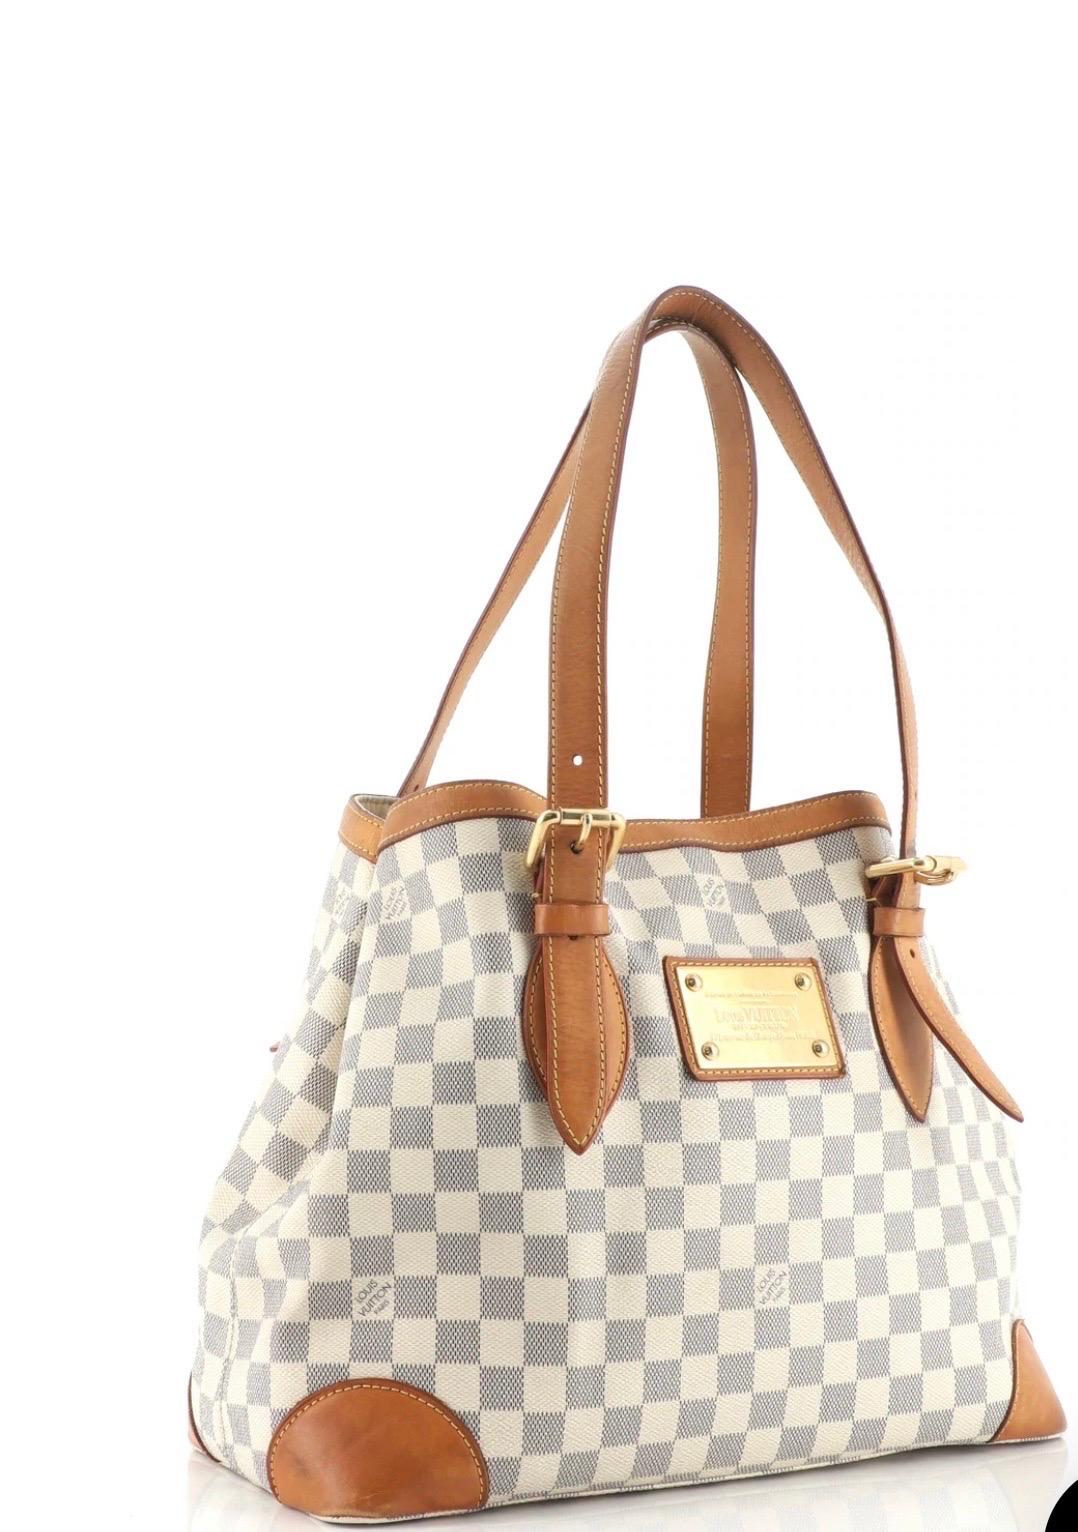 
Louis Vuitton Hampstead Damier Azur Mm White Canvas Shoulder Bag
Structured Hampstead tote rendered in Louis Vuitton's signature Damier Azur  checked coated canvas, trimmed with tonal leather and accented with gold-tone brass hardware.
Condition 